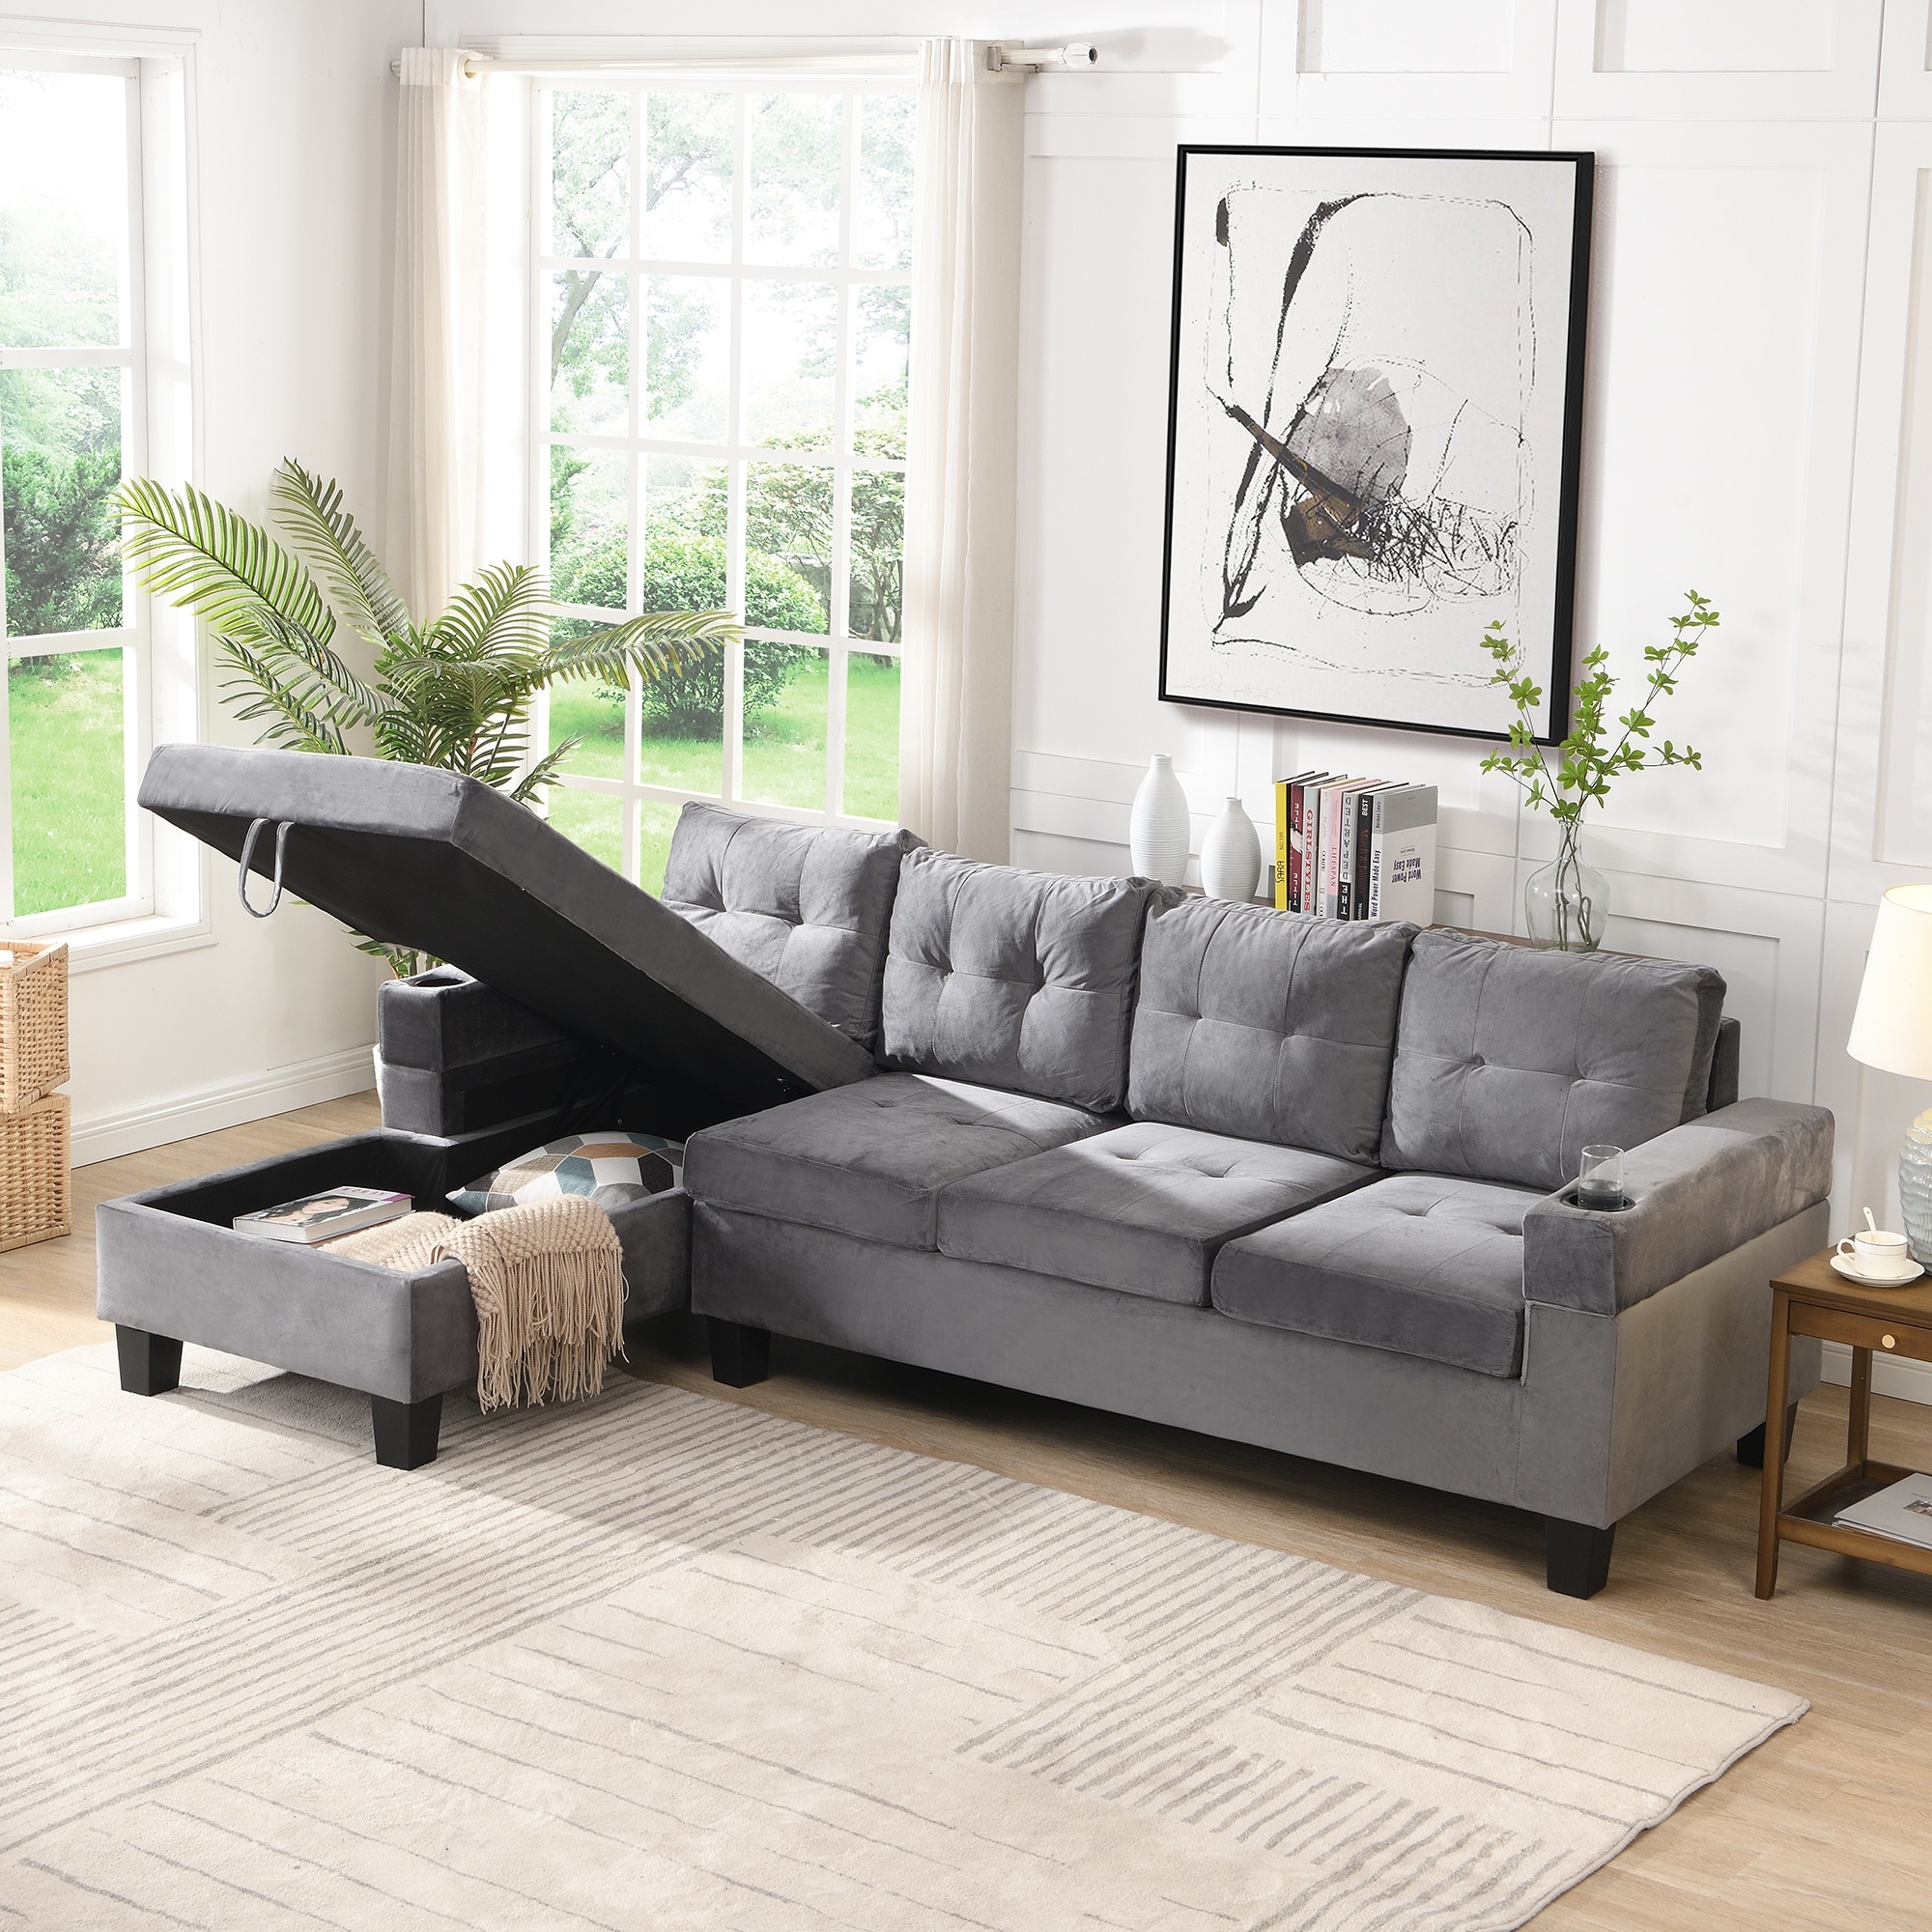 https://ak1.ostkcdn.com/images/products/is/images/direct/f65832a3f4e68fca3b8f75b91dee77edced0065d/L-shape-4-Seat-Sofa-Set-Grey-Velvet-Couch-with-Cupholder-%26-Storage.jpg